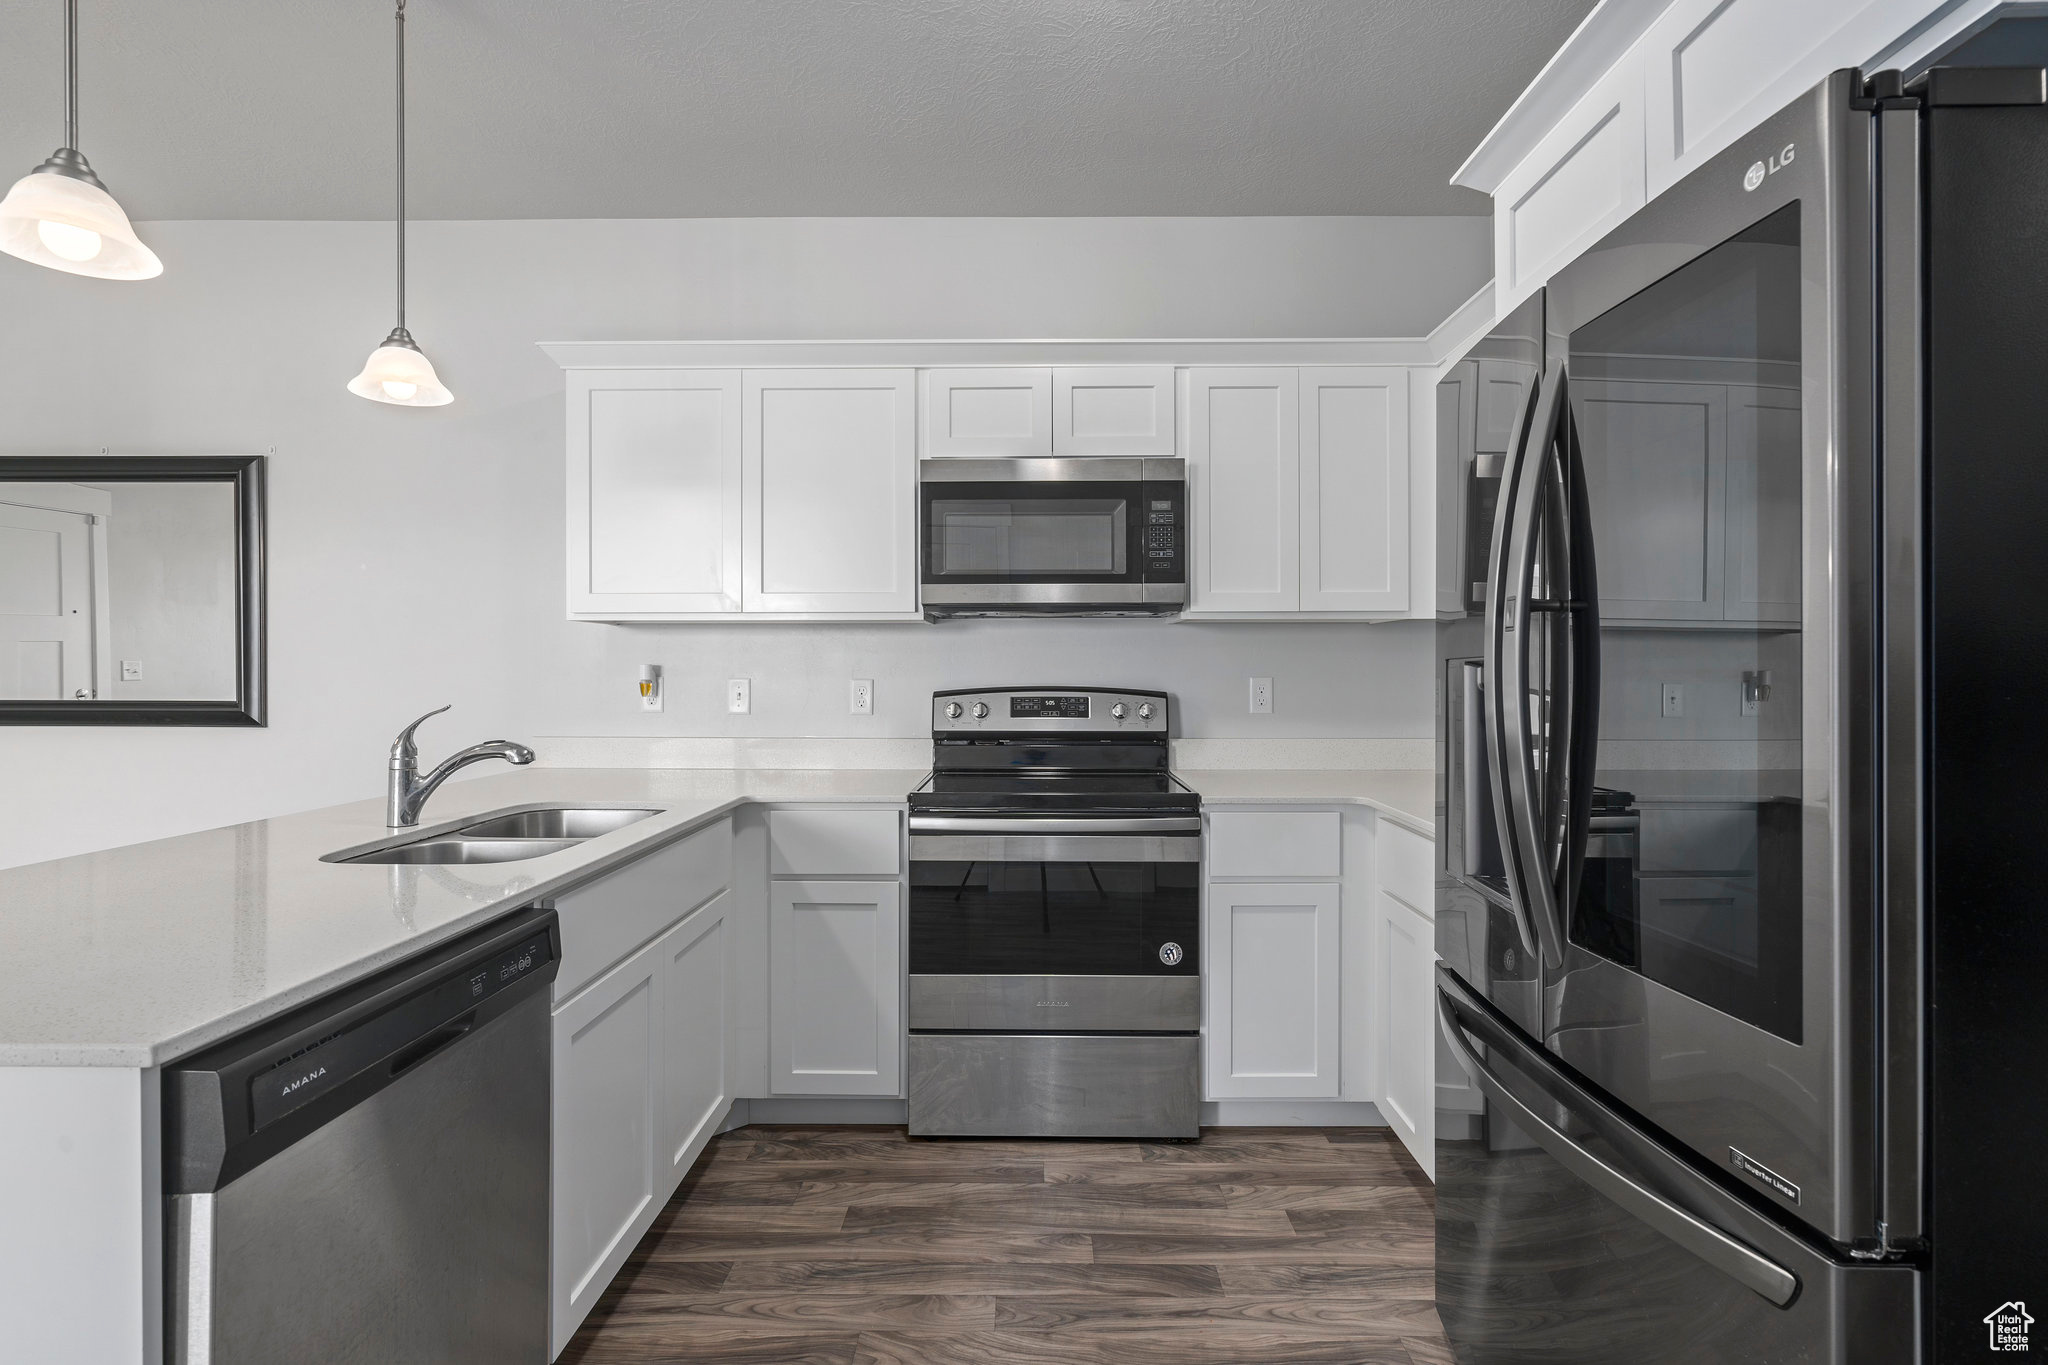 Kitchen with decorative light fixtures, appliances with stainless steel finishes,  wood-type flooring, white cabinets, and sink